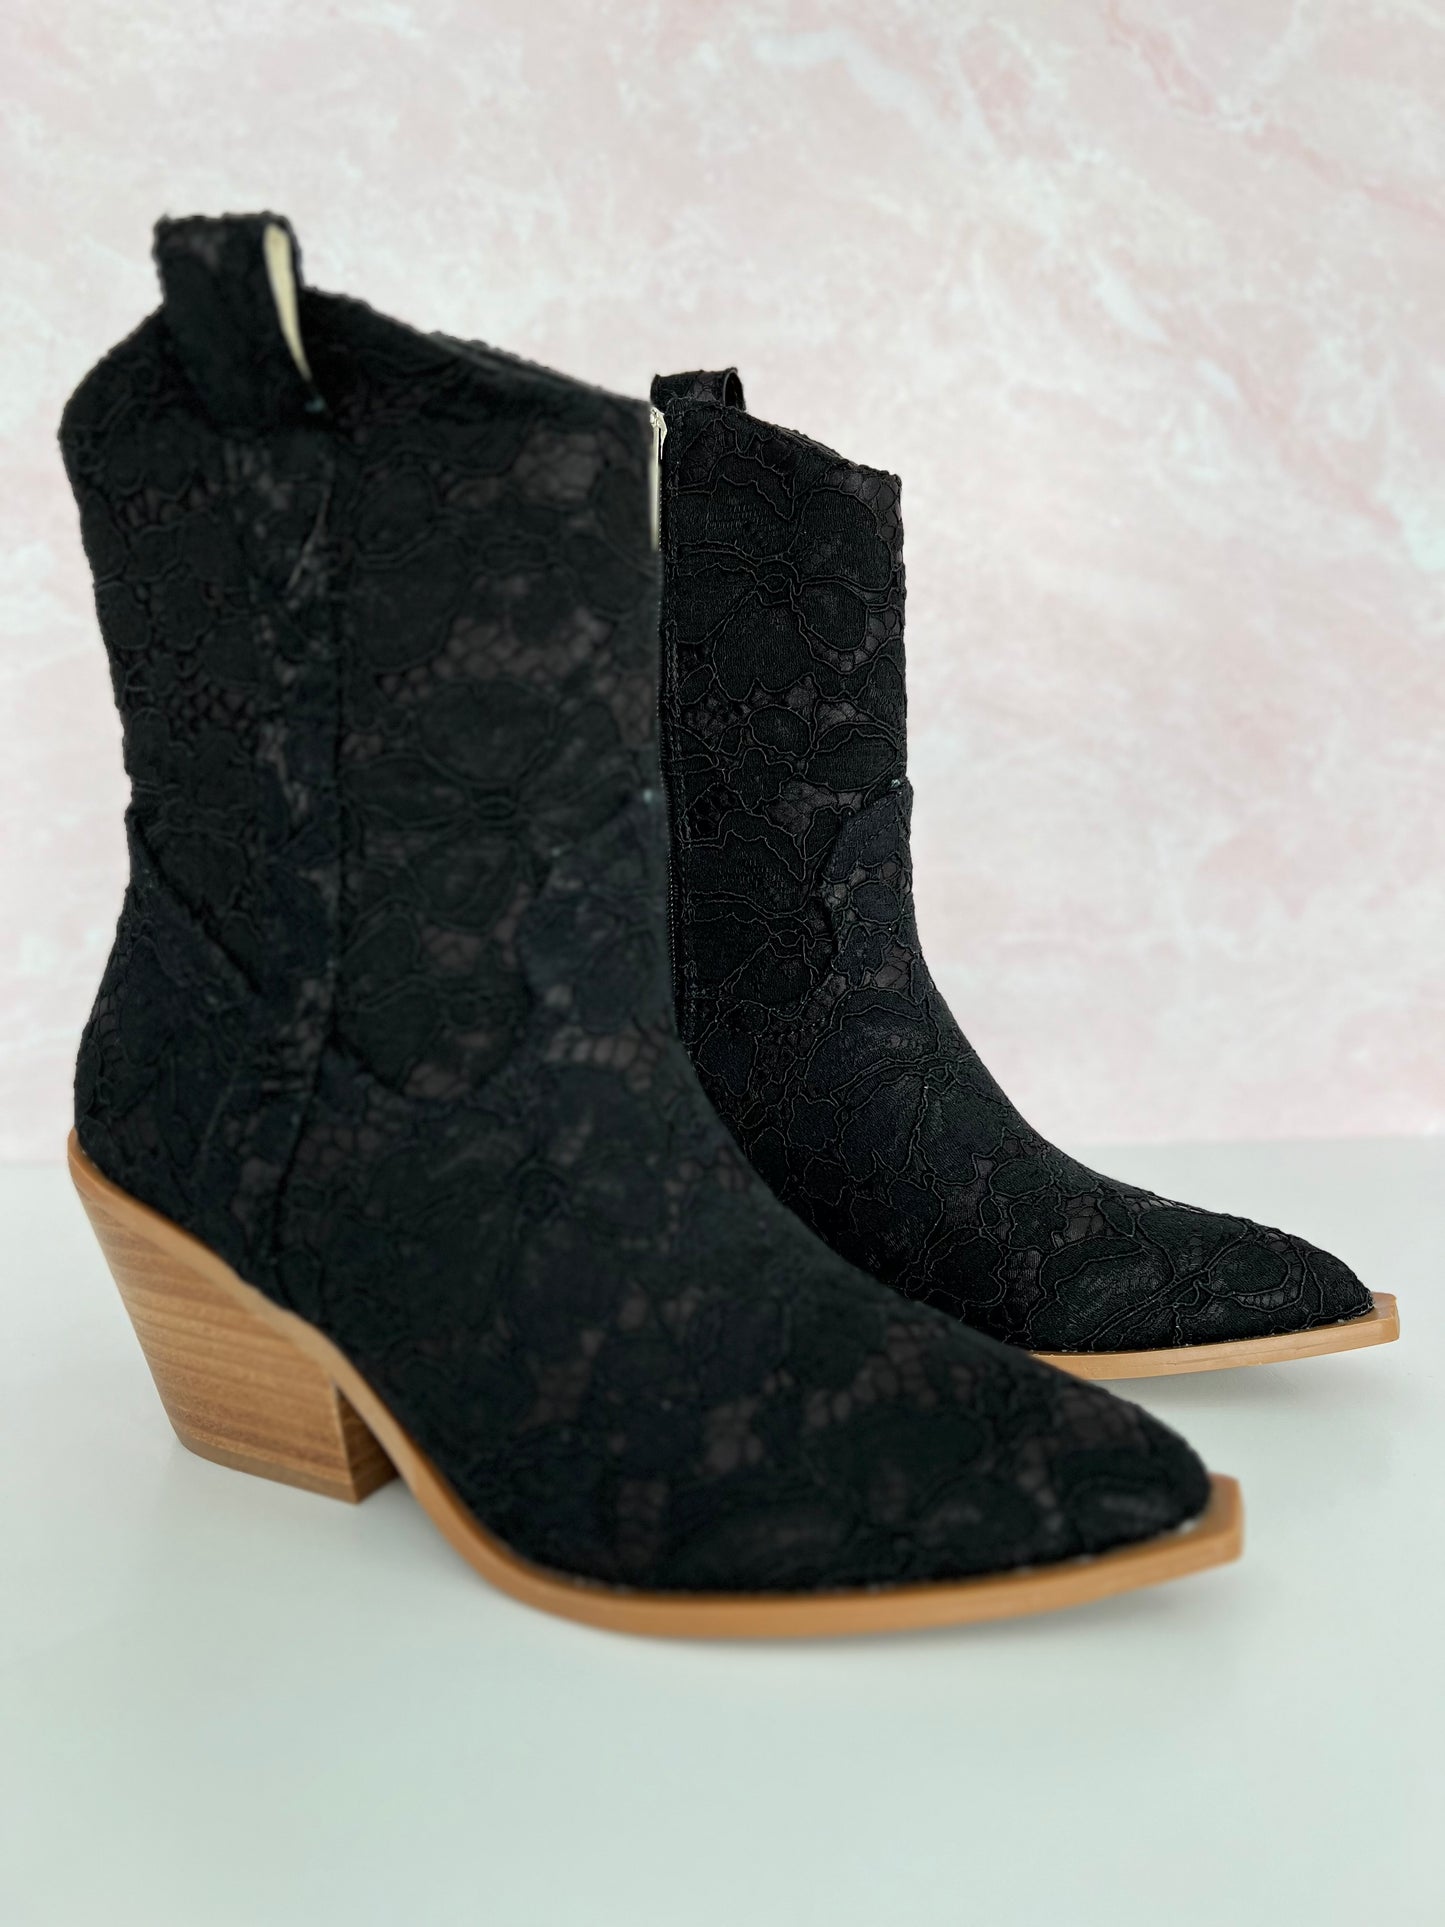 Corky's Rowdy Boot - Black Lace